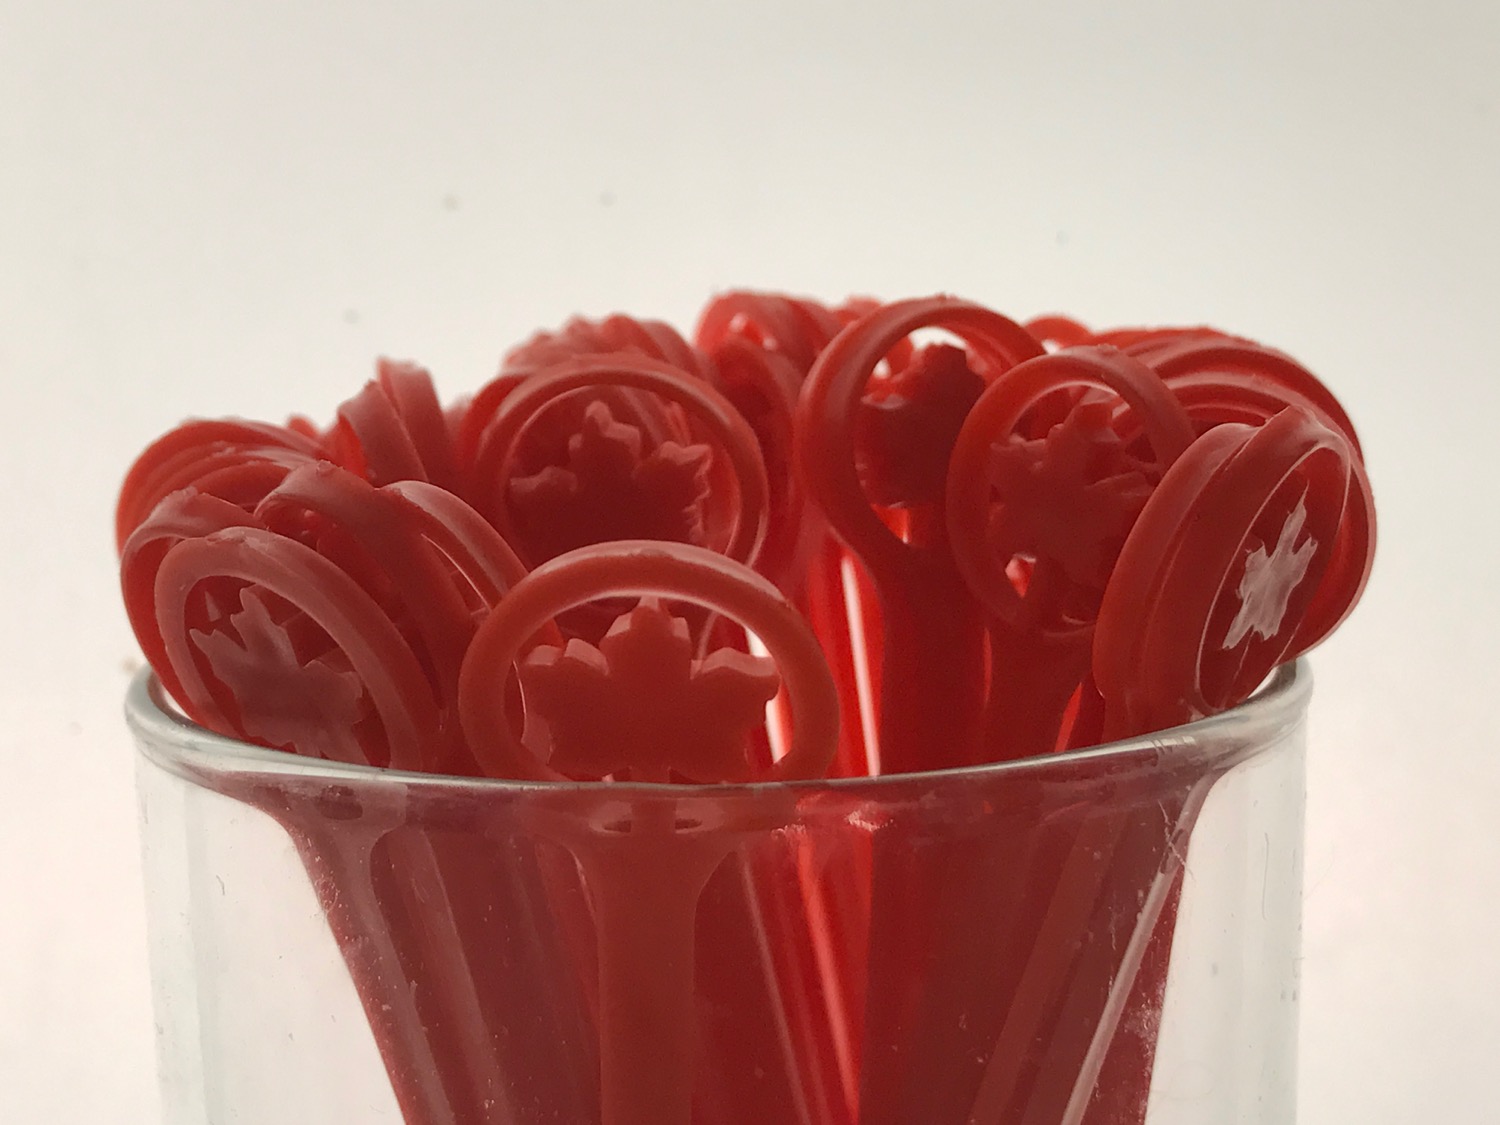 a glass with red plastic objects